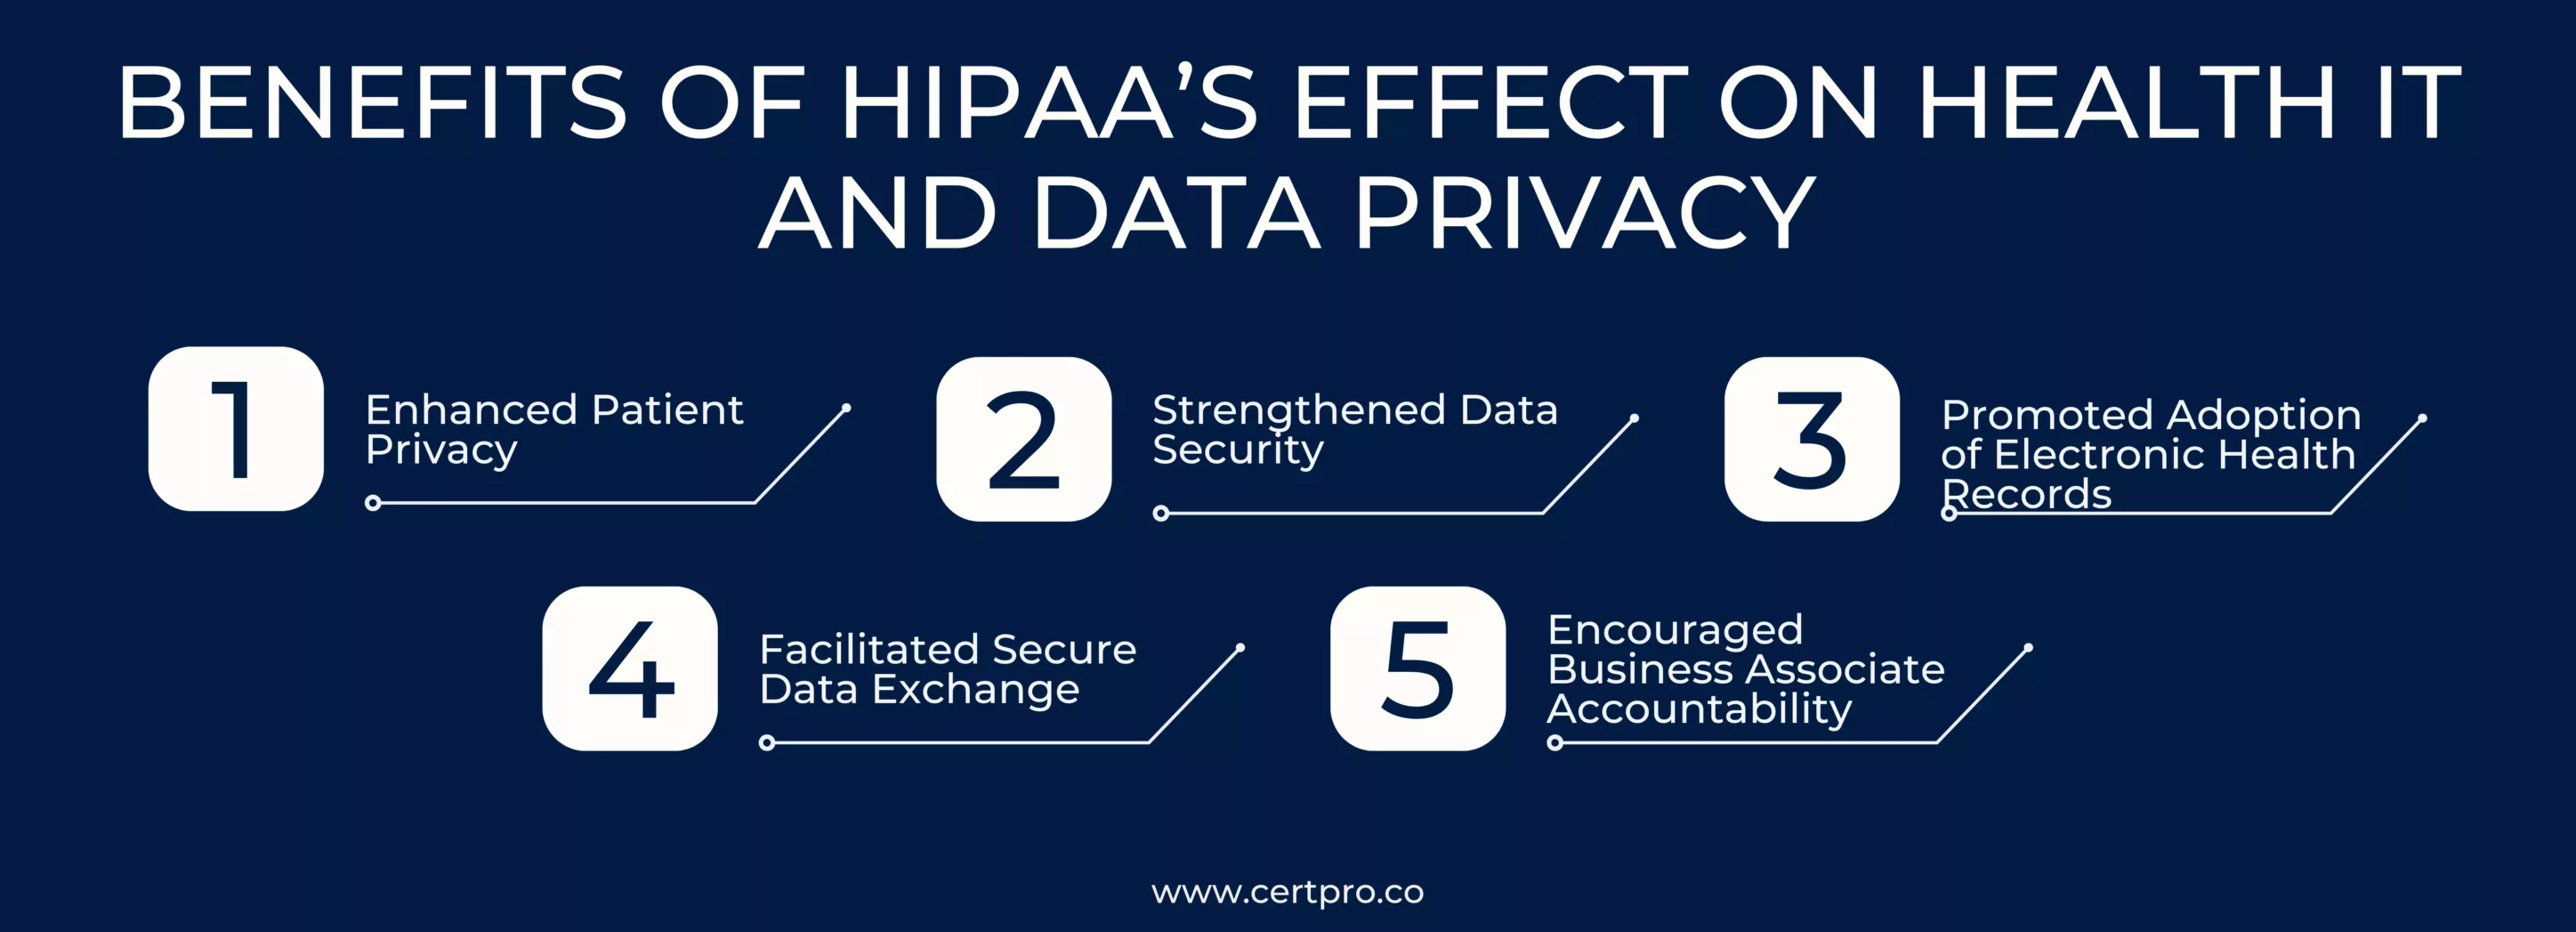 BENEFITS OF HIPAA’S EFFECT ON HEALTH IT AND DATA PRIVACY